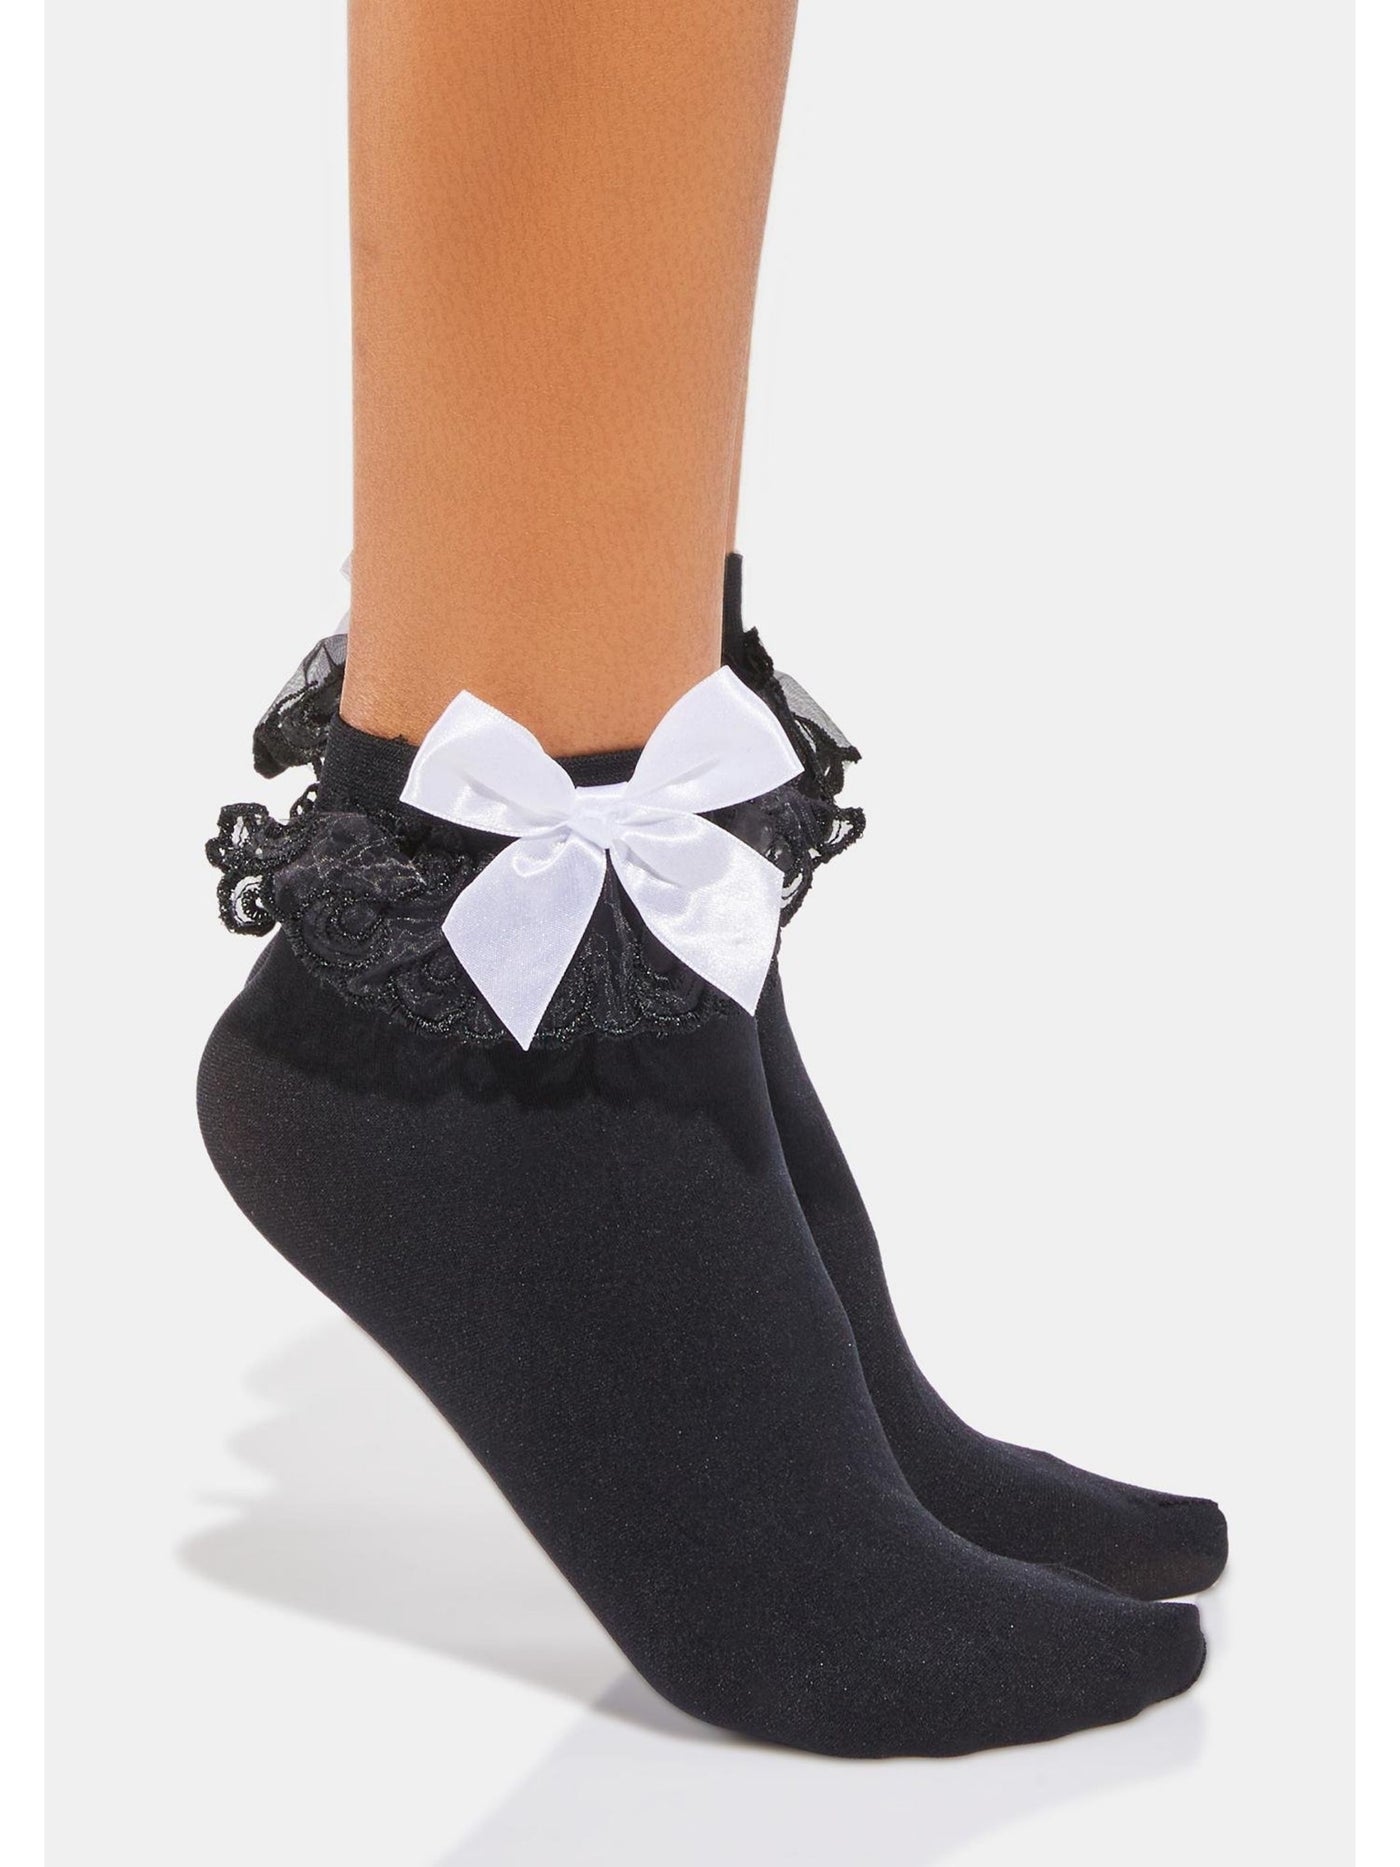 Gothic Lolita Black Ruffle Ankle Socks with White Bow